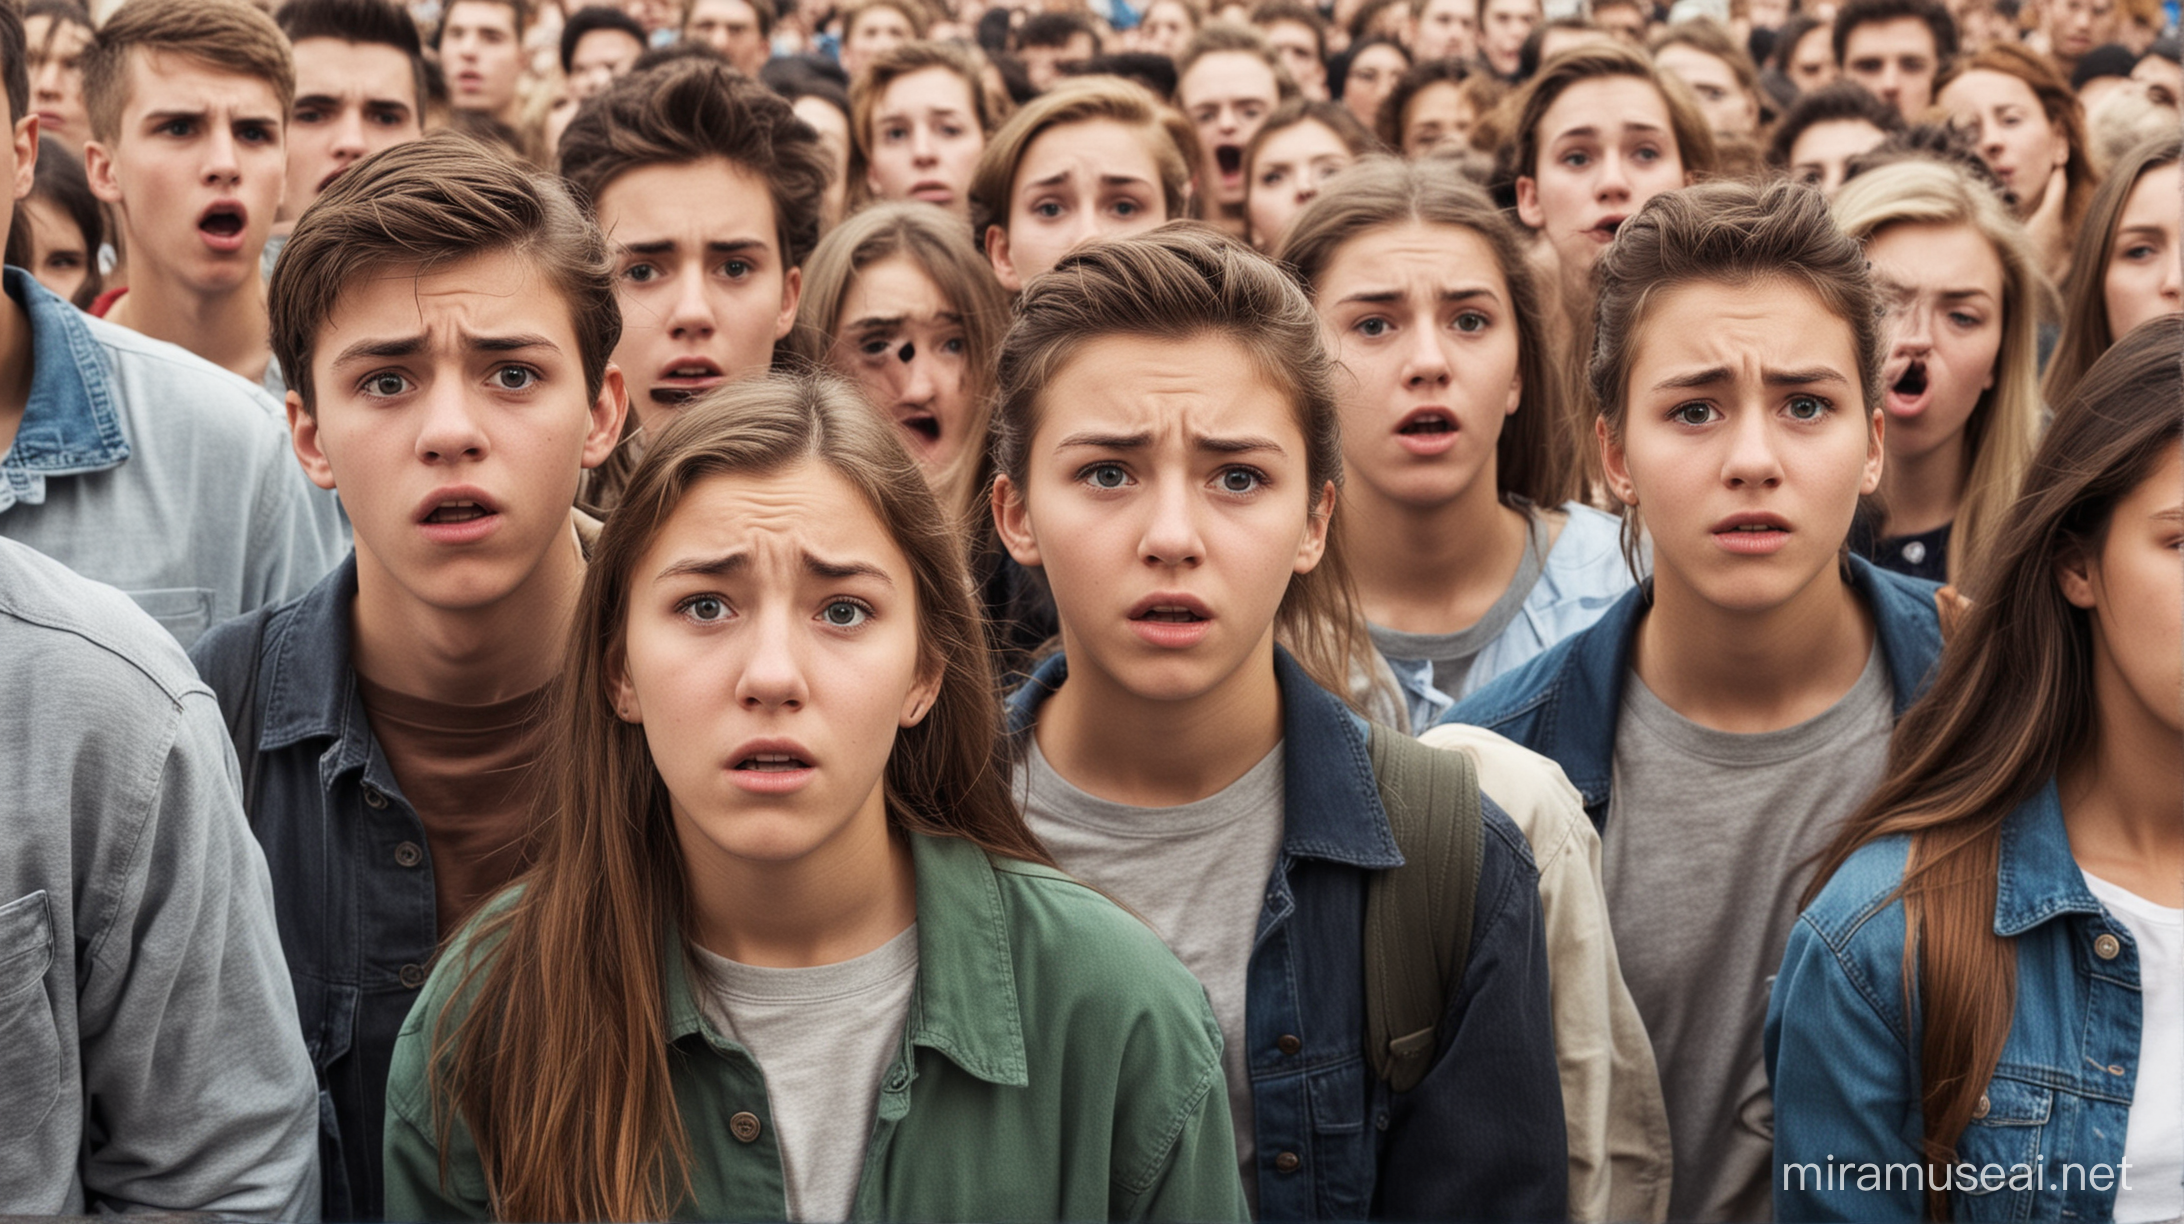 teenagers stood in a crowd looking forward and scared